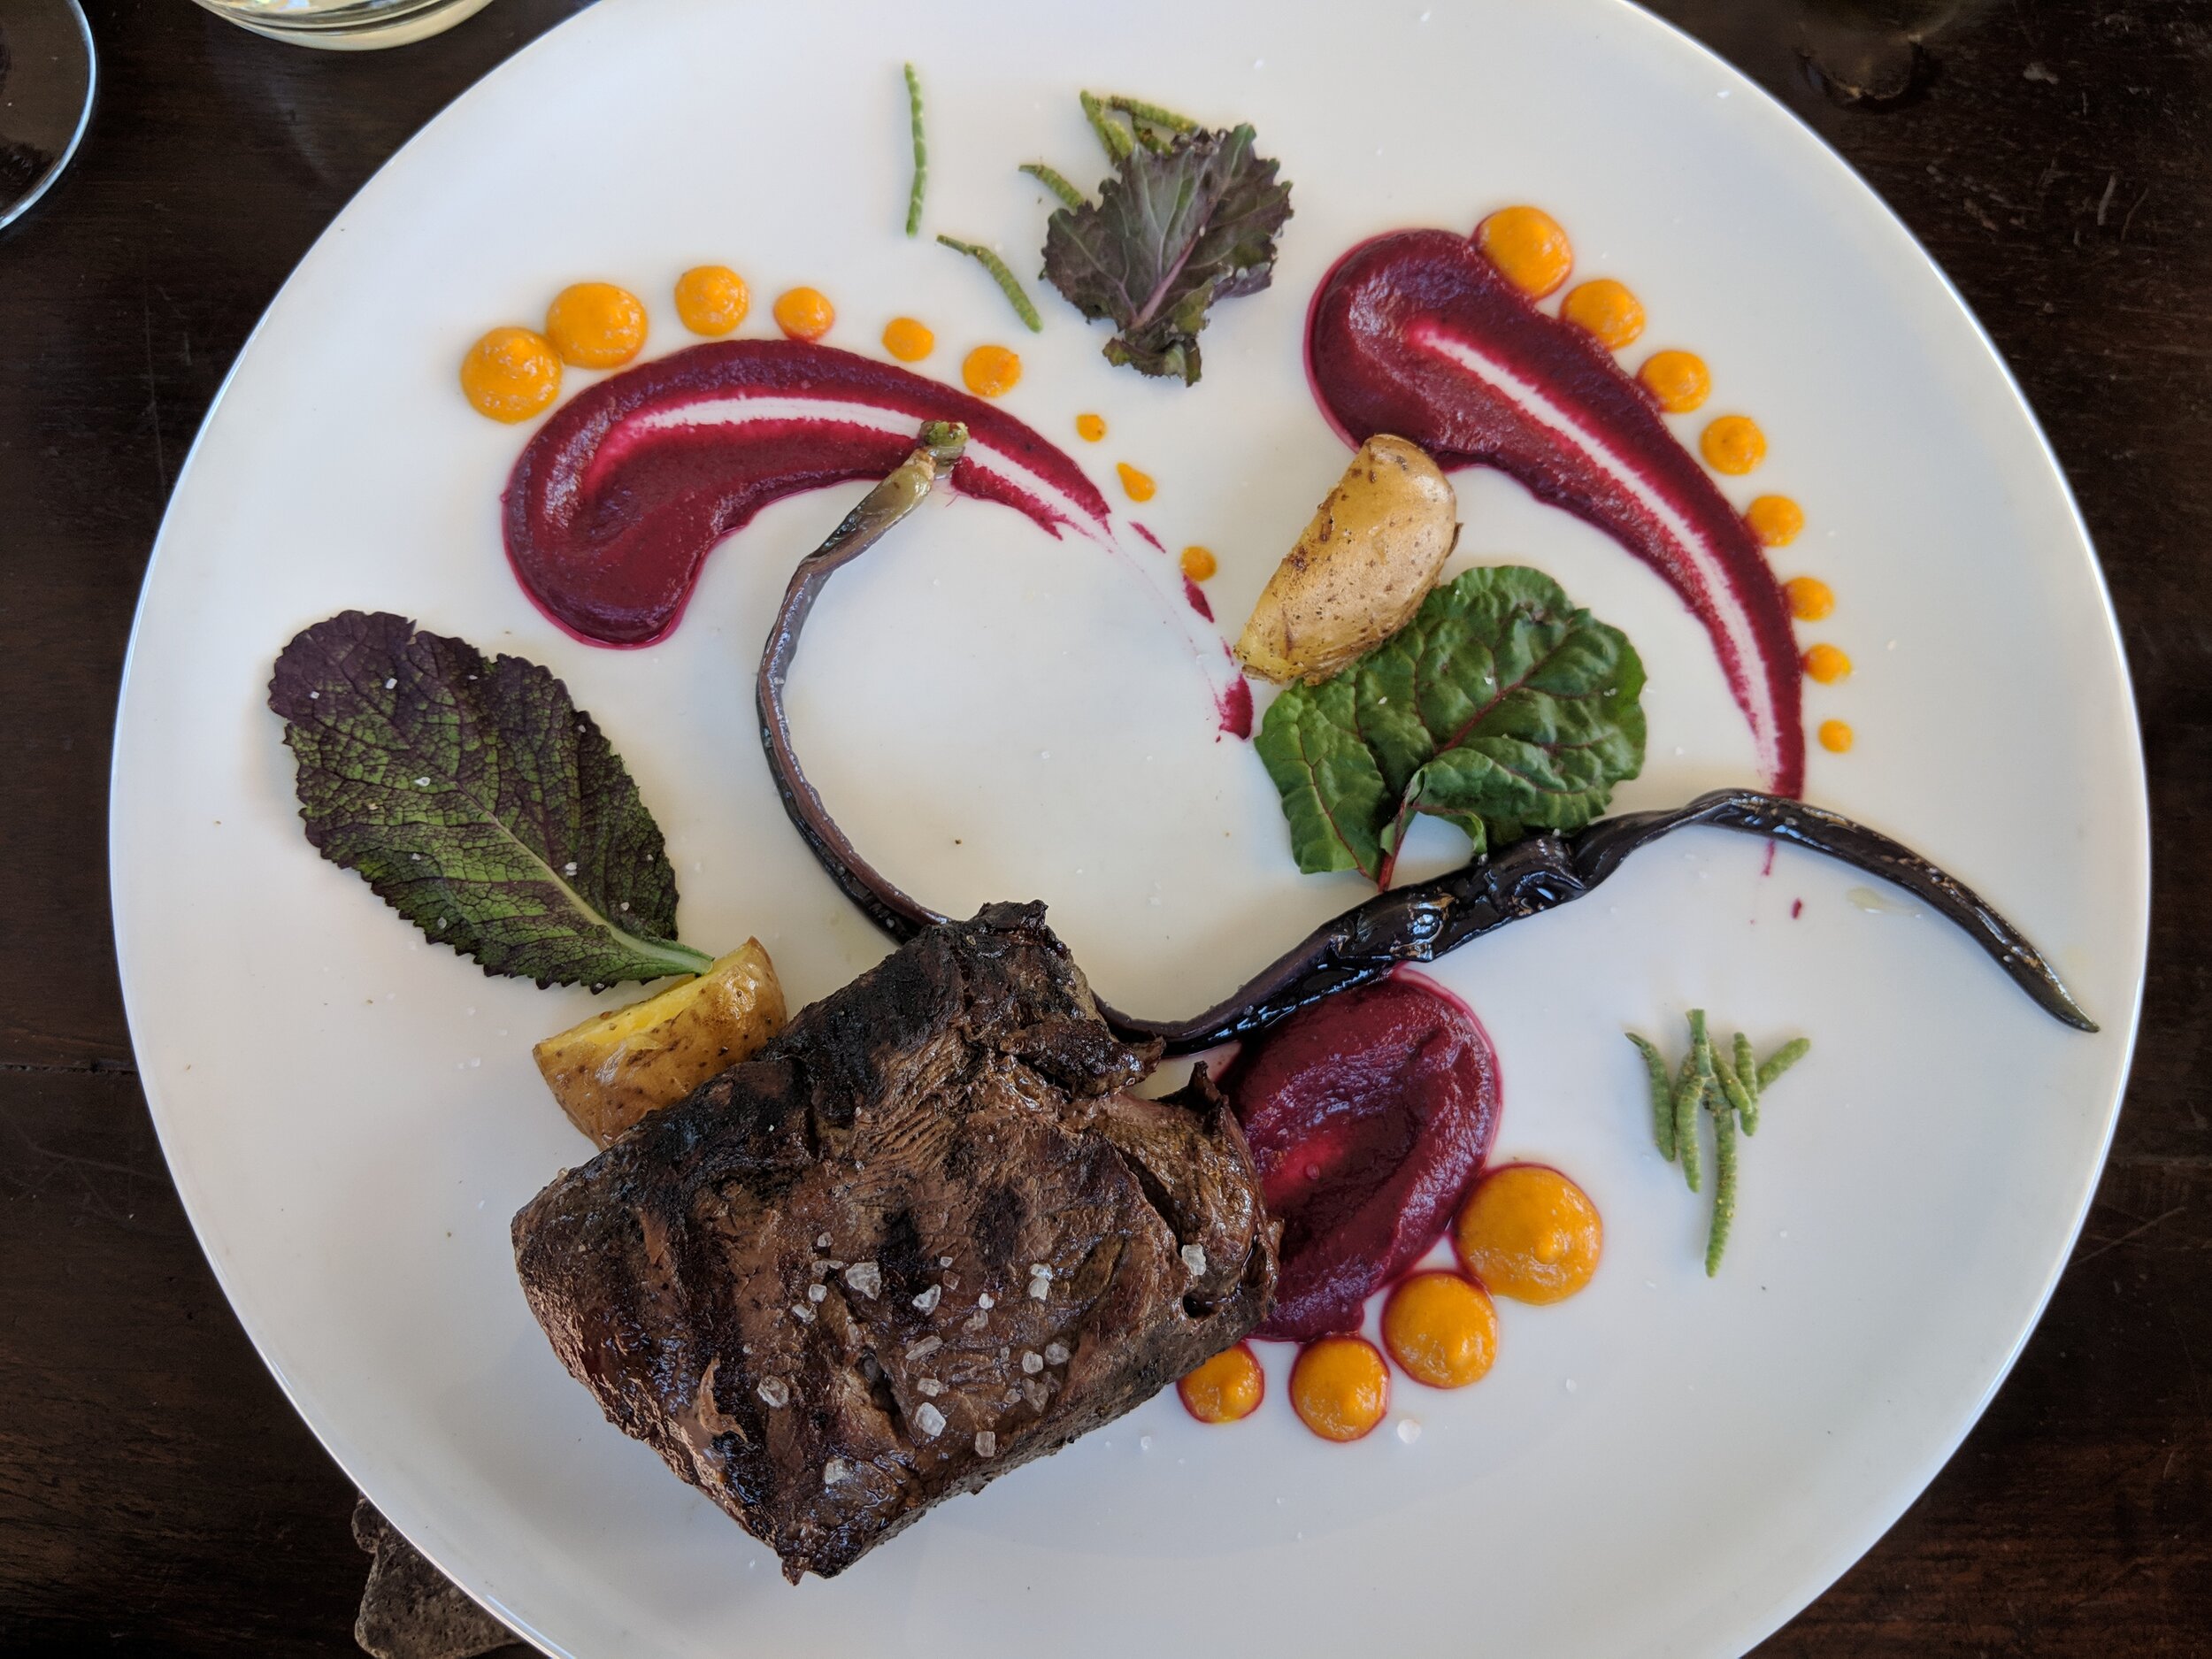 colourful food plate from Ruca Malen restaurant in Mendoza